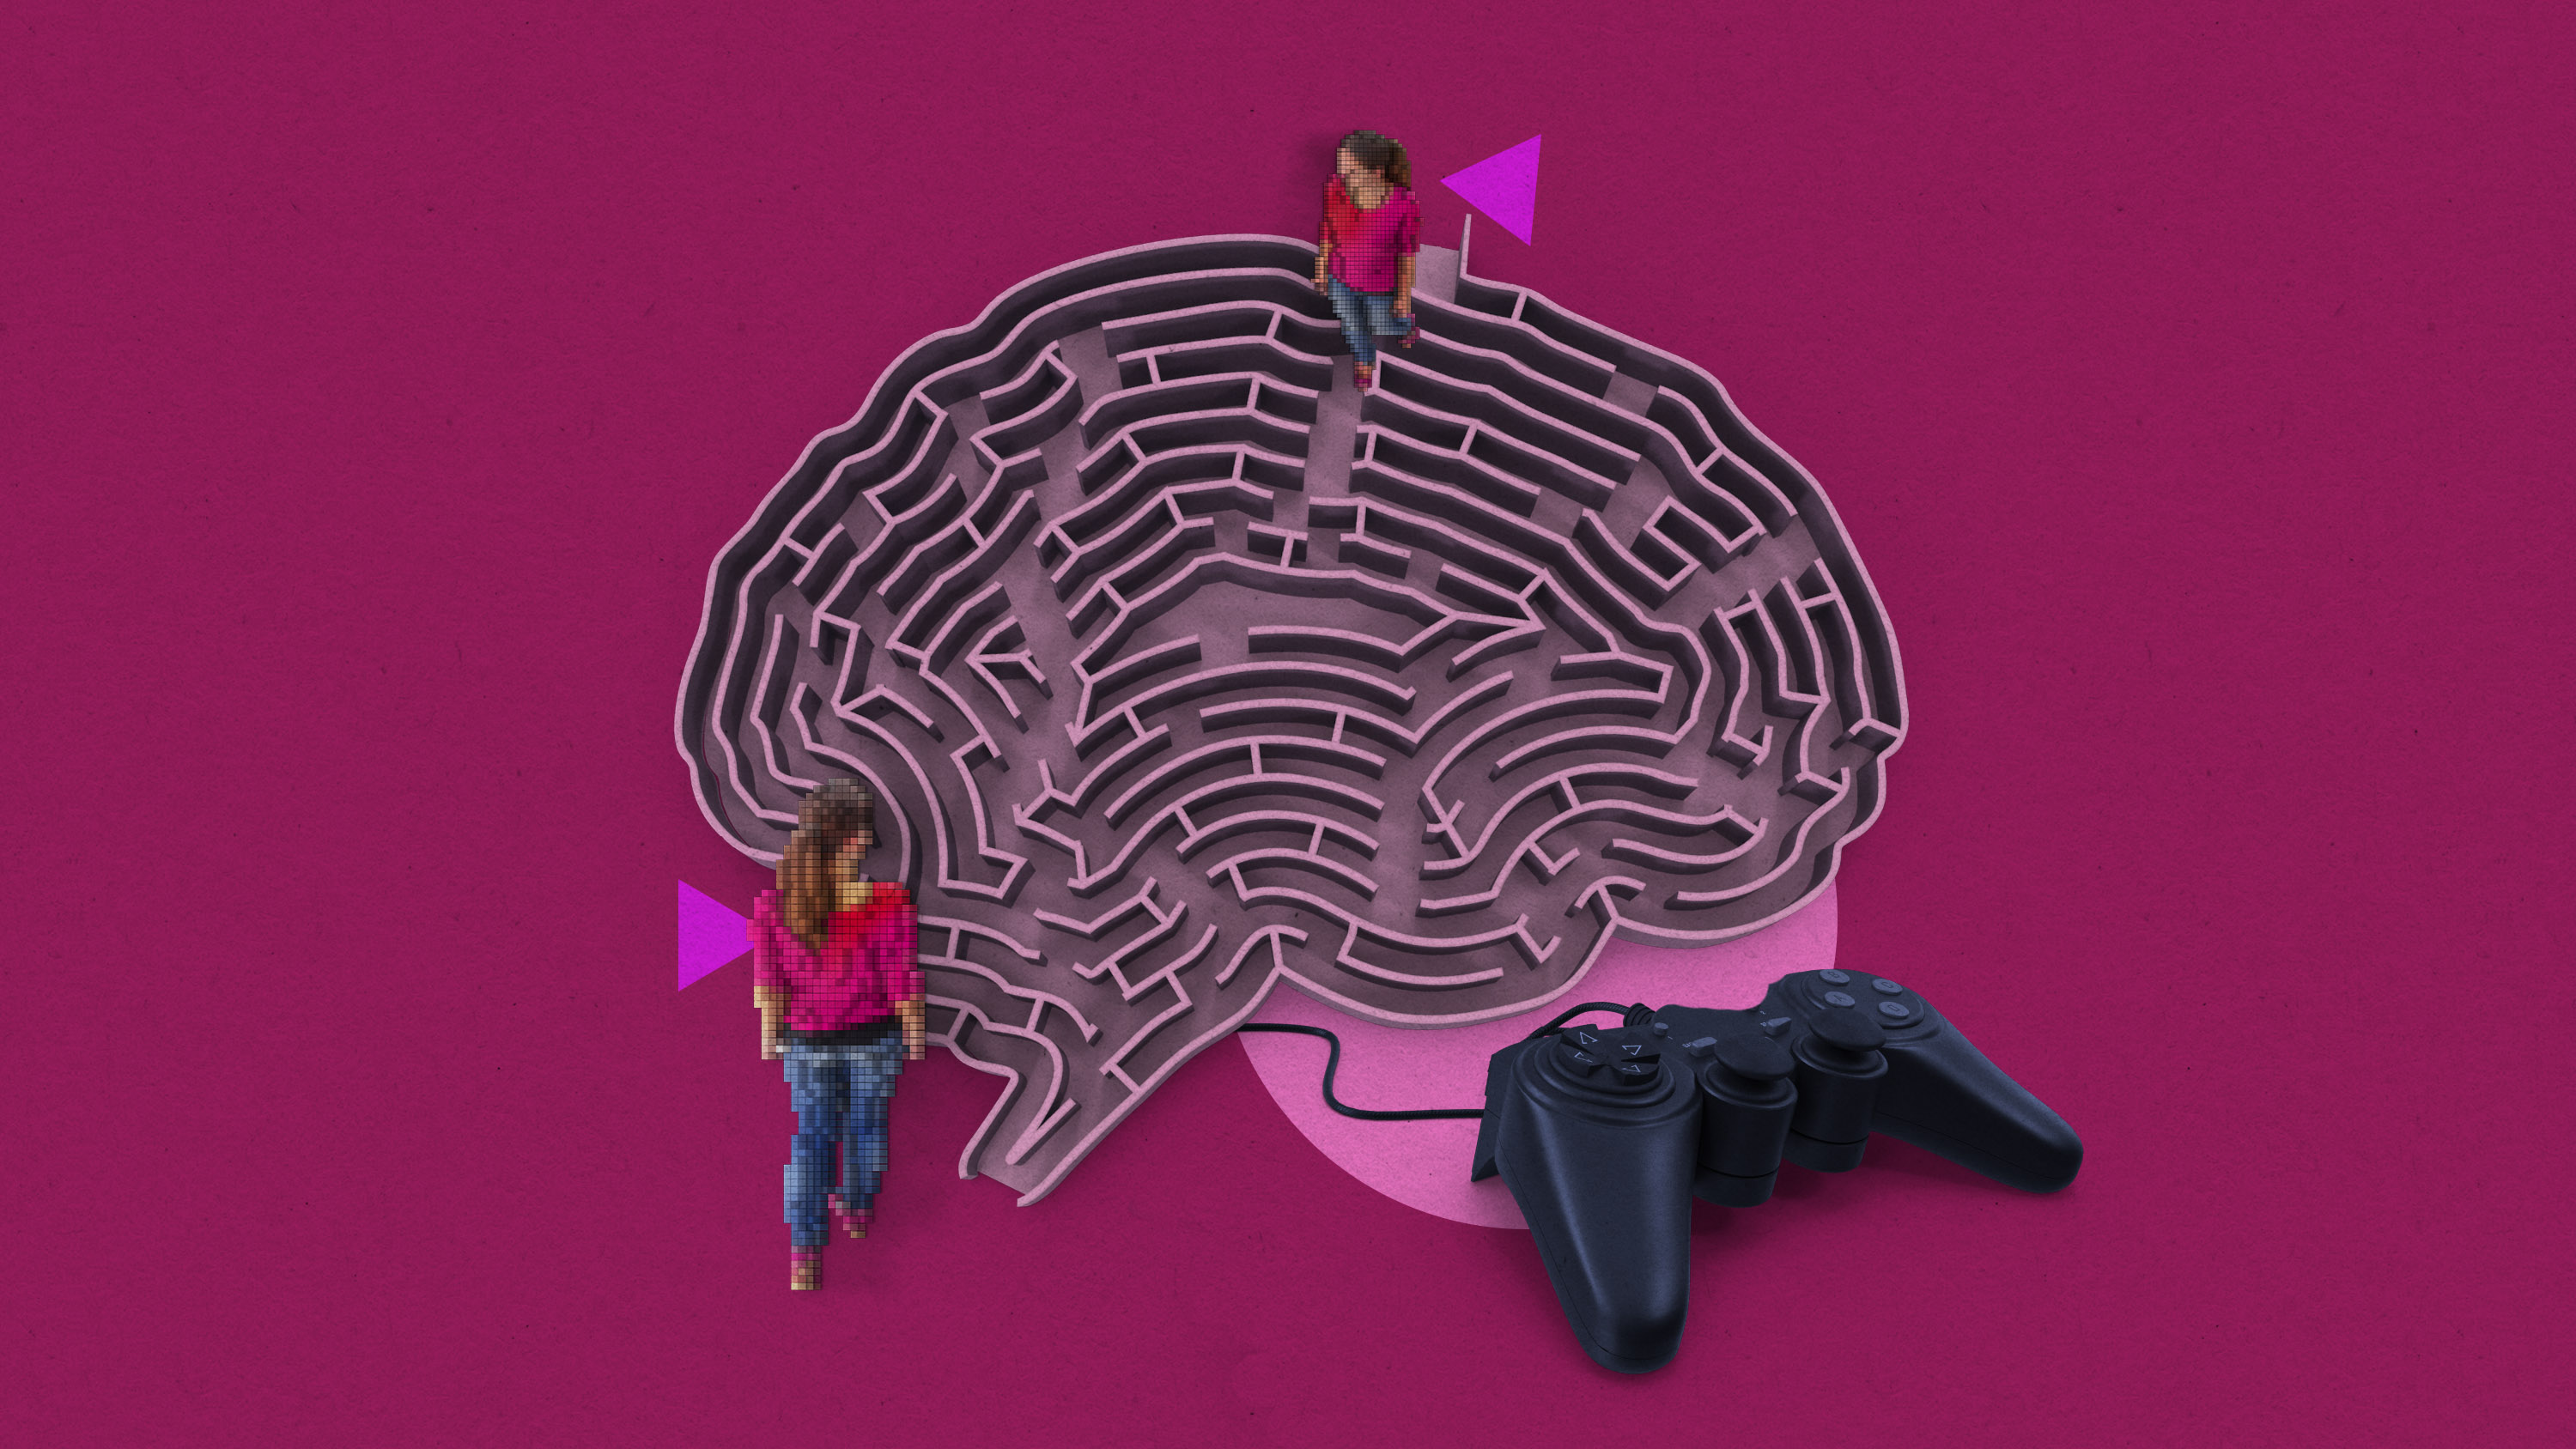 2 instances of a pixelated female character enter a brain shaped maze next to a game controller